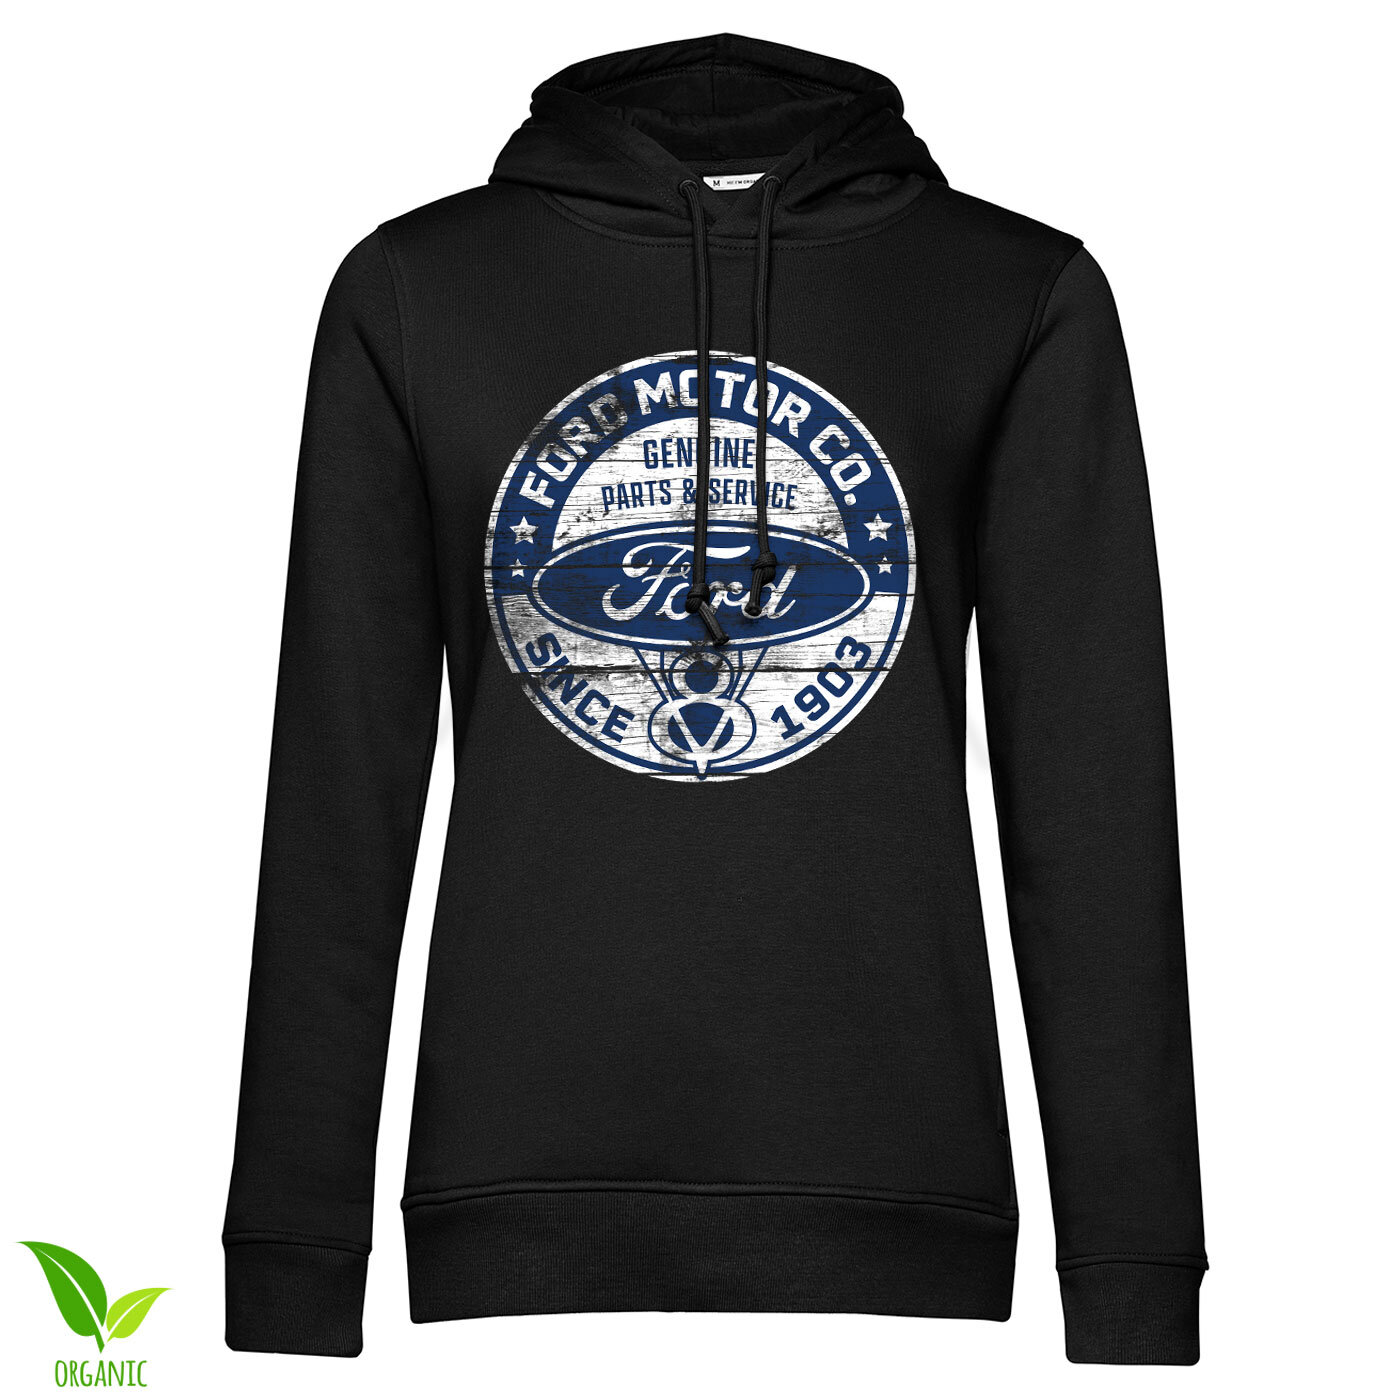 Ford Motor Co. Since 1903 Girls Hoodie